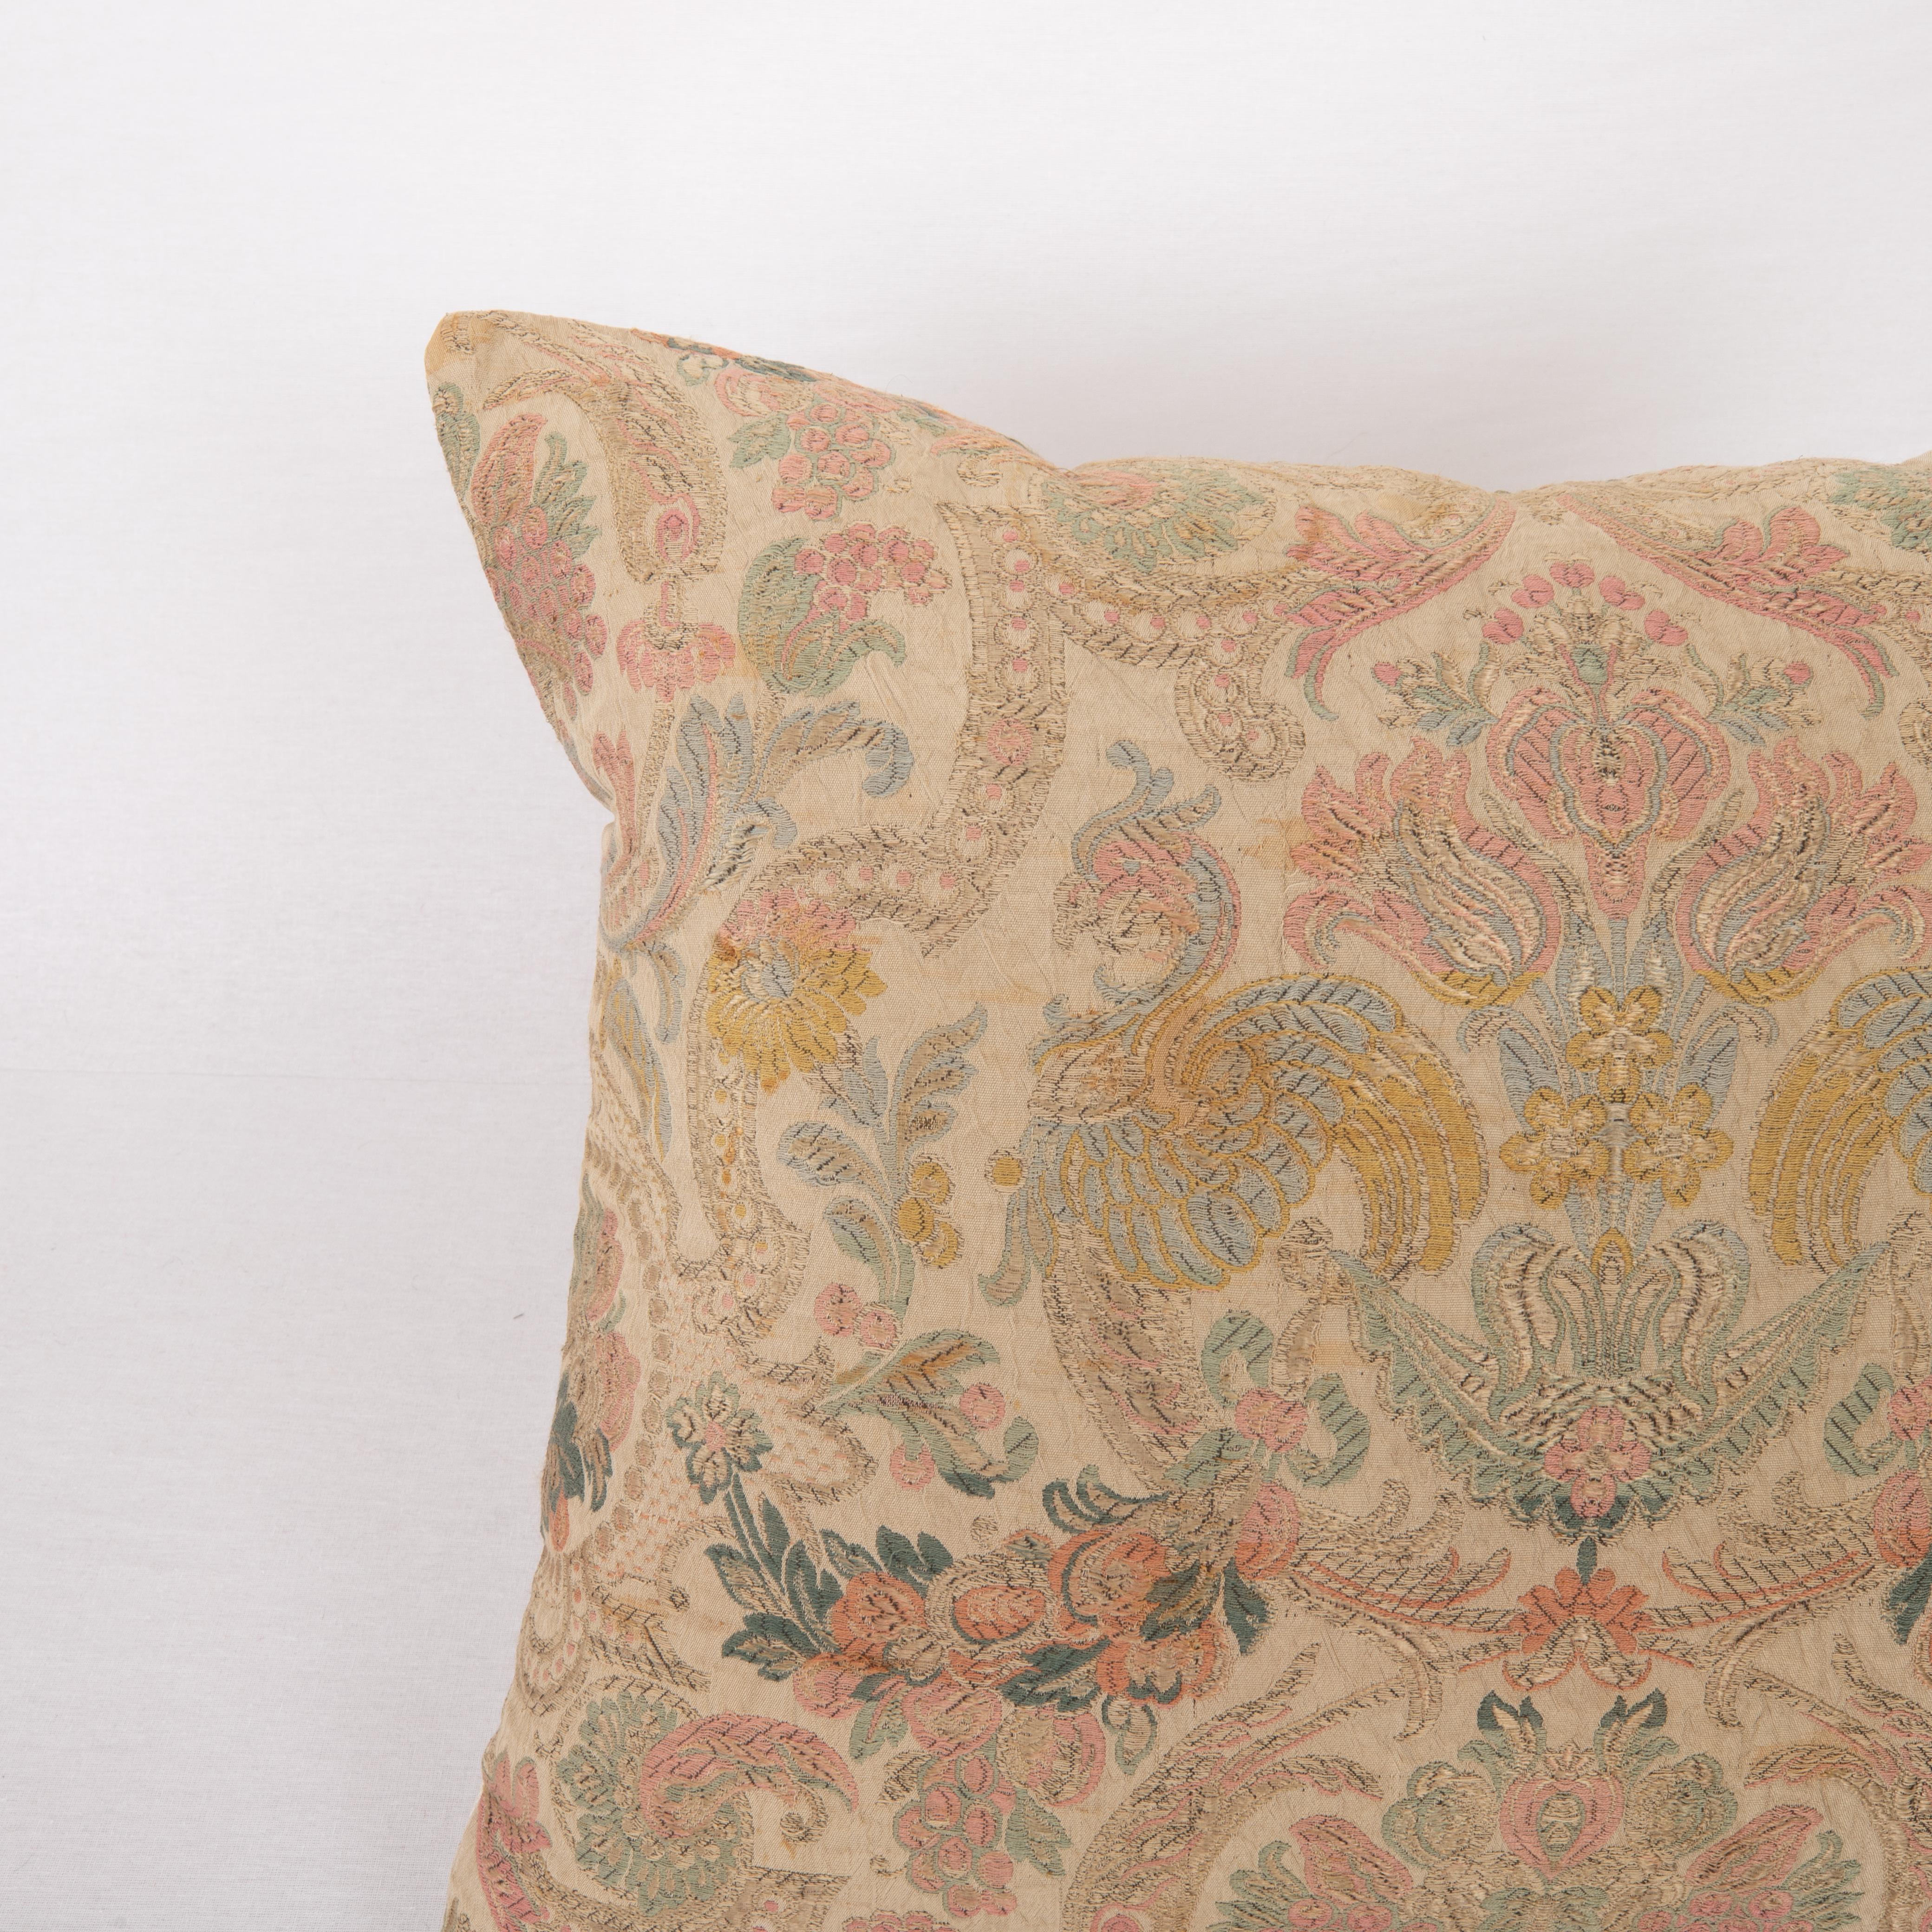 Renaissance Revival Pillow Cover Made from an Early 20th C. European Textile For Sale